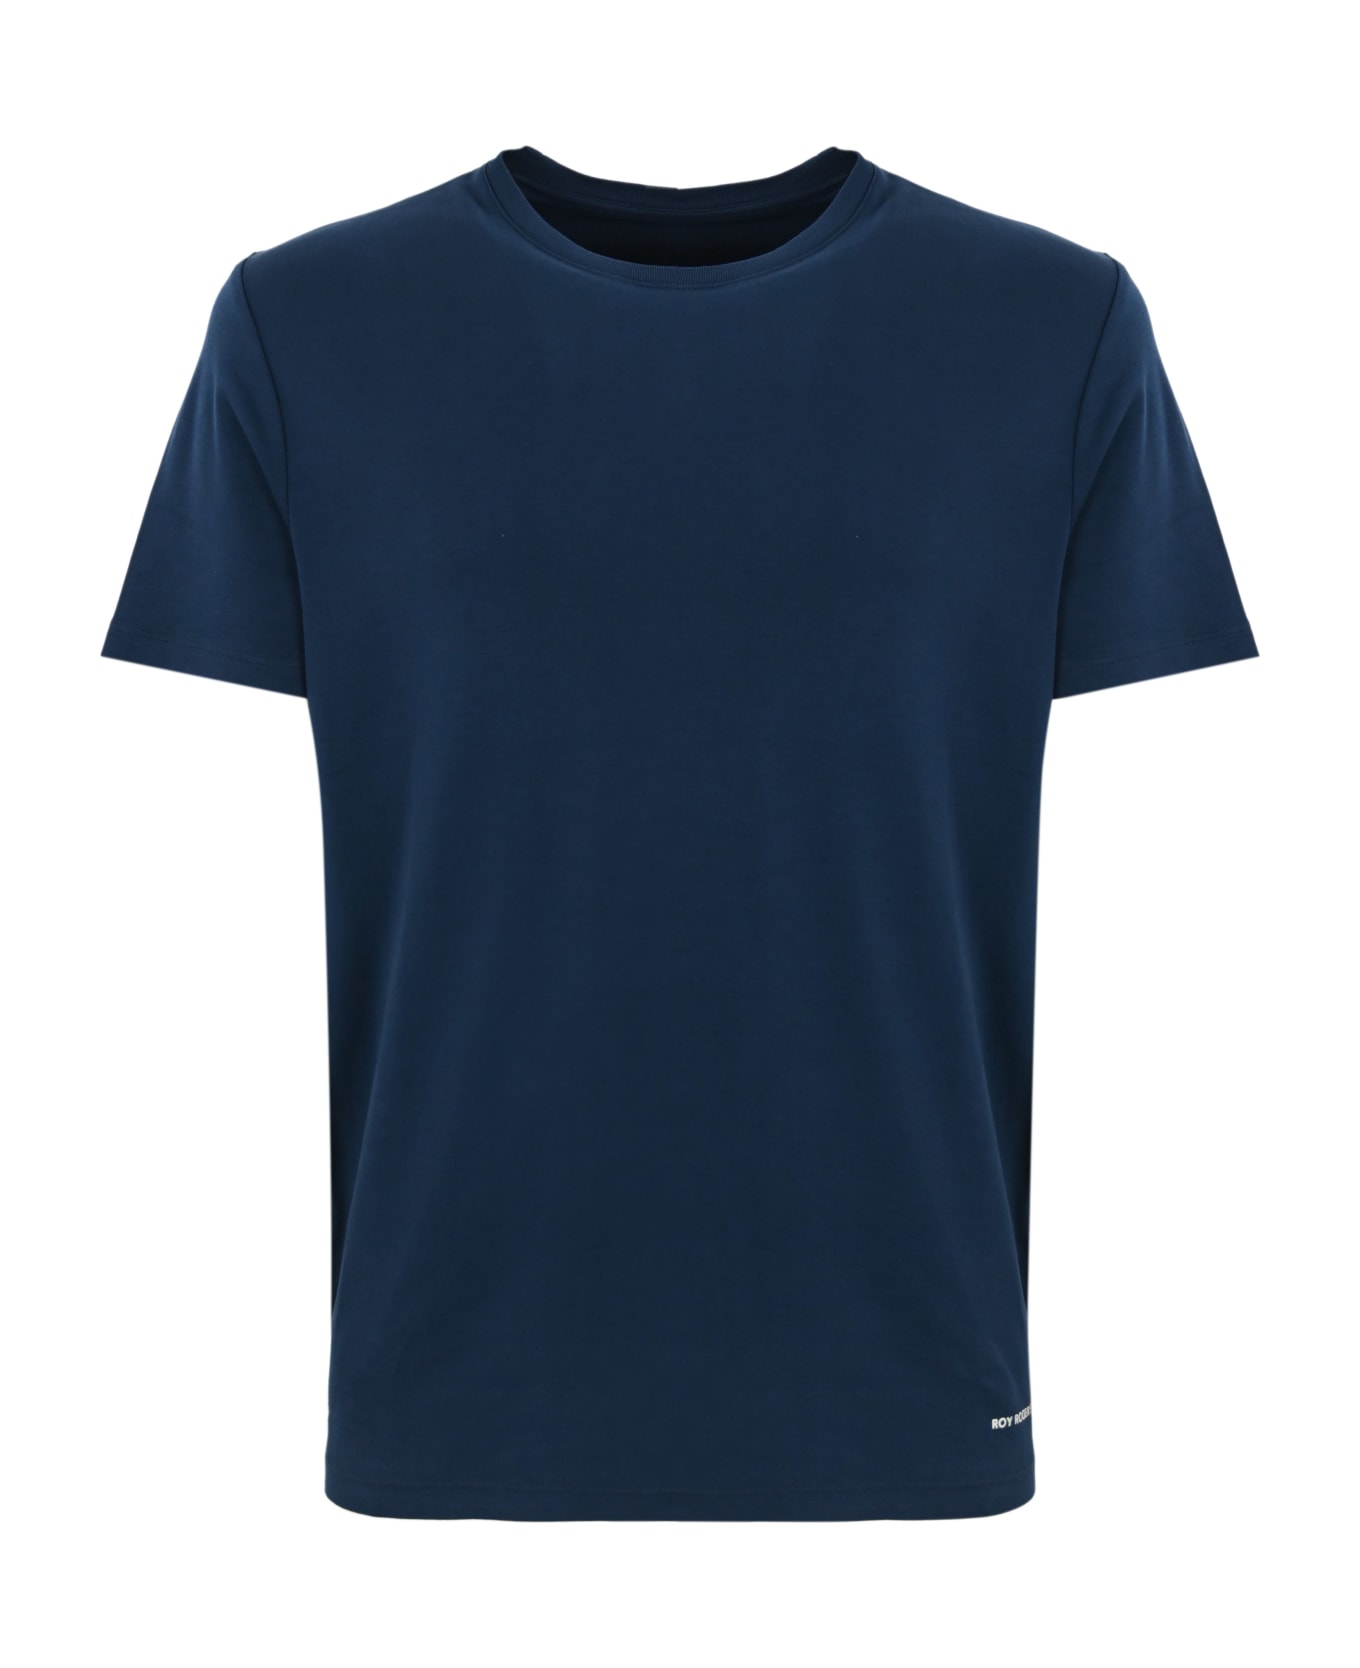 Roy Rogers Cotton T-shirt With Logo - Blue navy